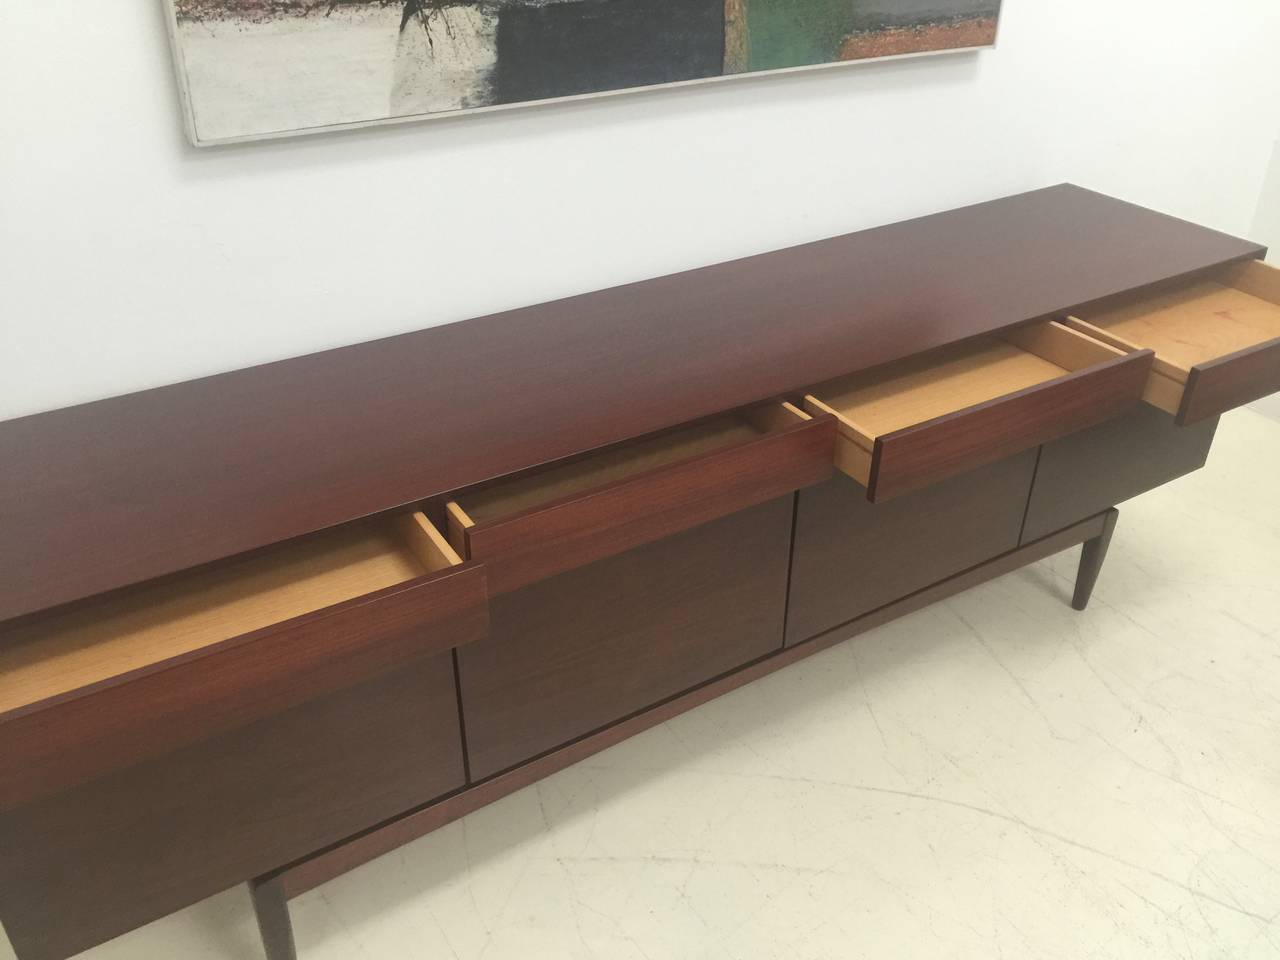 Long Walnut Buffet with four doors and four top drawers.
Elegant detail with integrated finger pulls at the top of book 
matched solid wood doors.
Solid Walnut 11'h tapered legs with a floating stretcher.
Additional four lined silver drawers